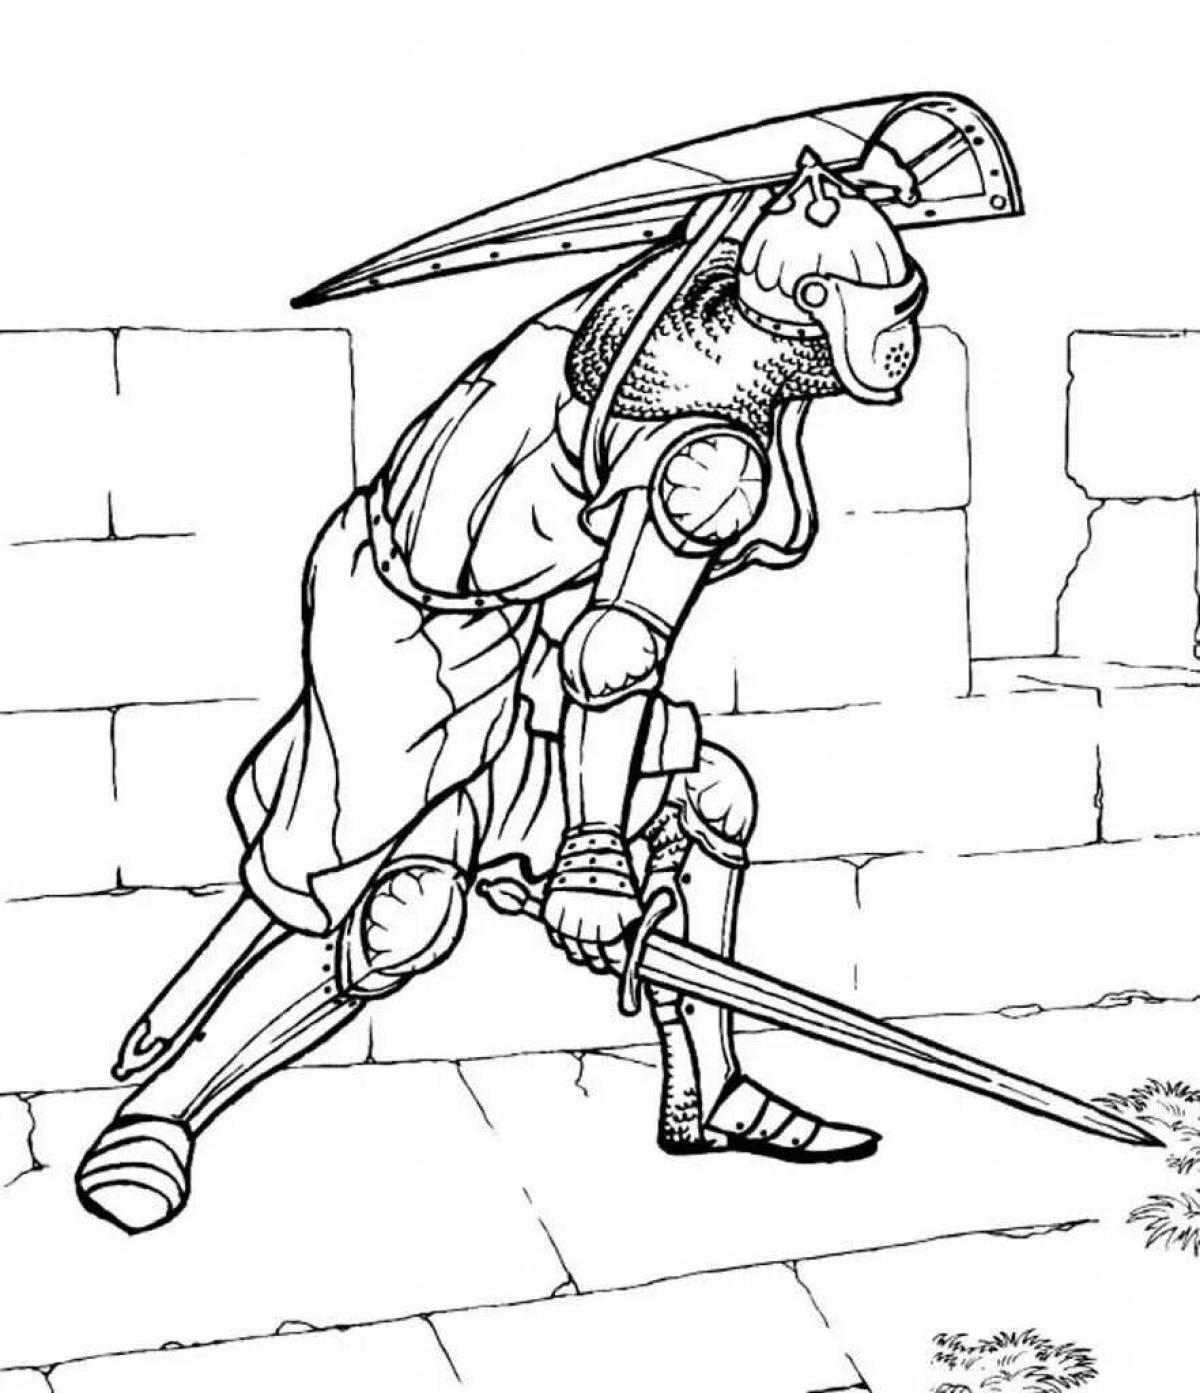 Heroic coloring book knight in armor